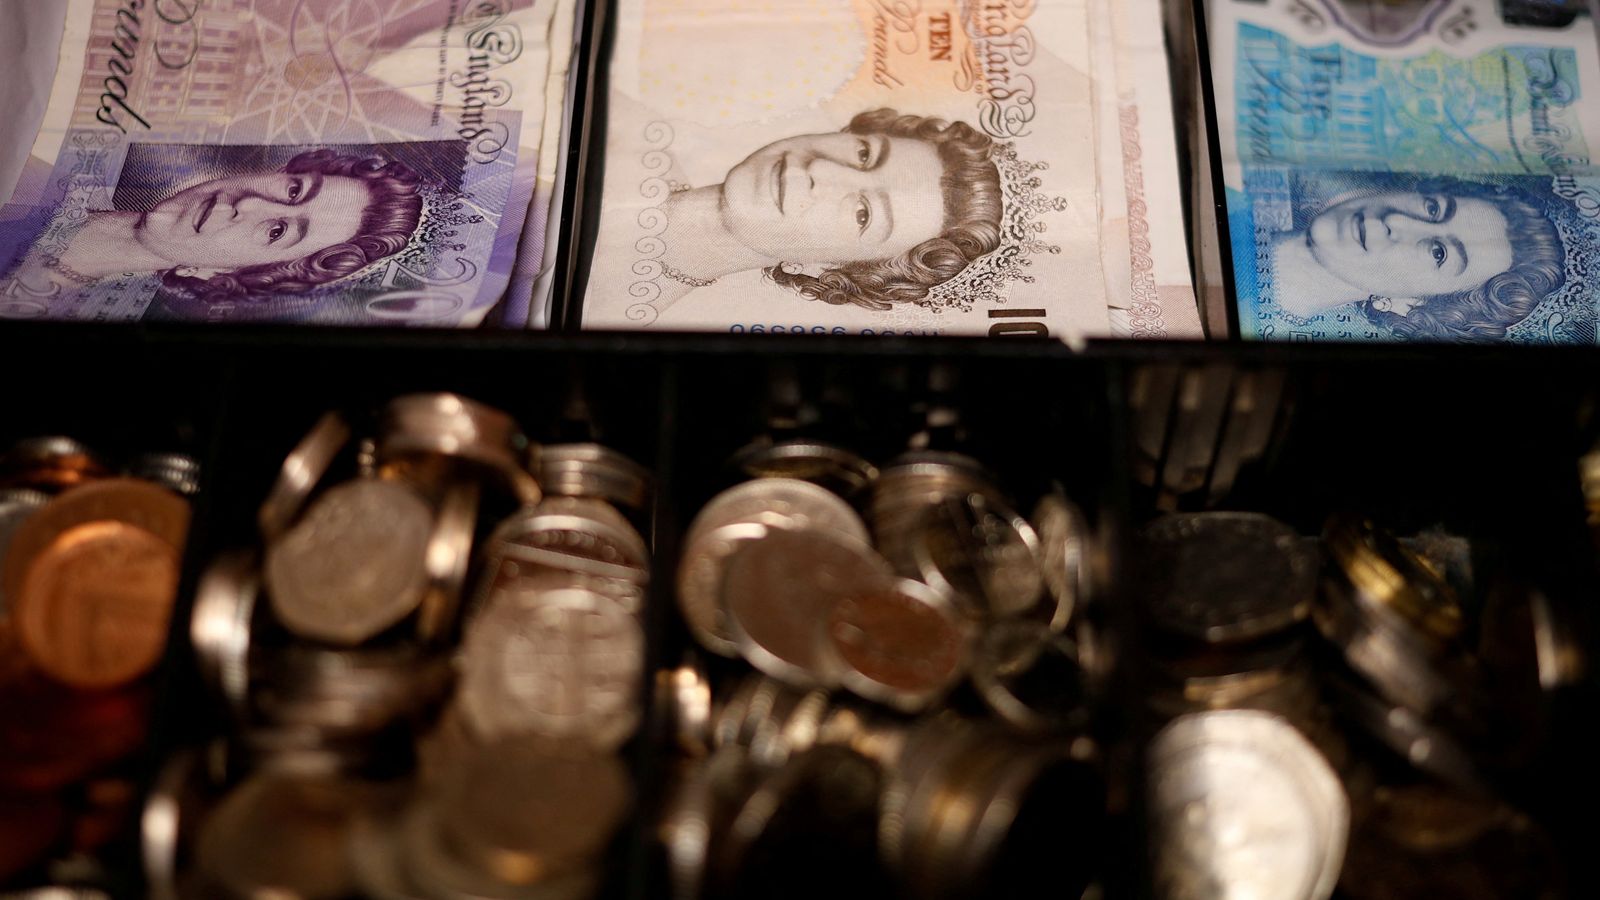 UK economy grows by 0.2% after predicted decline